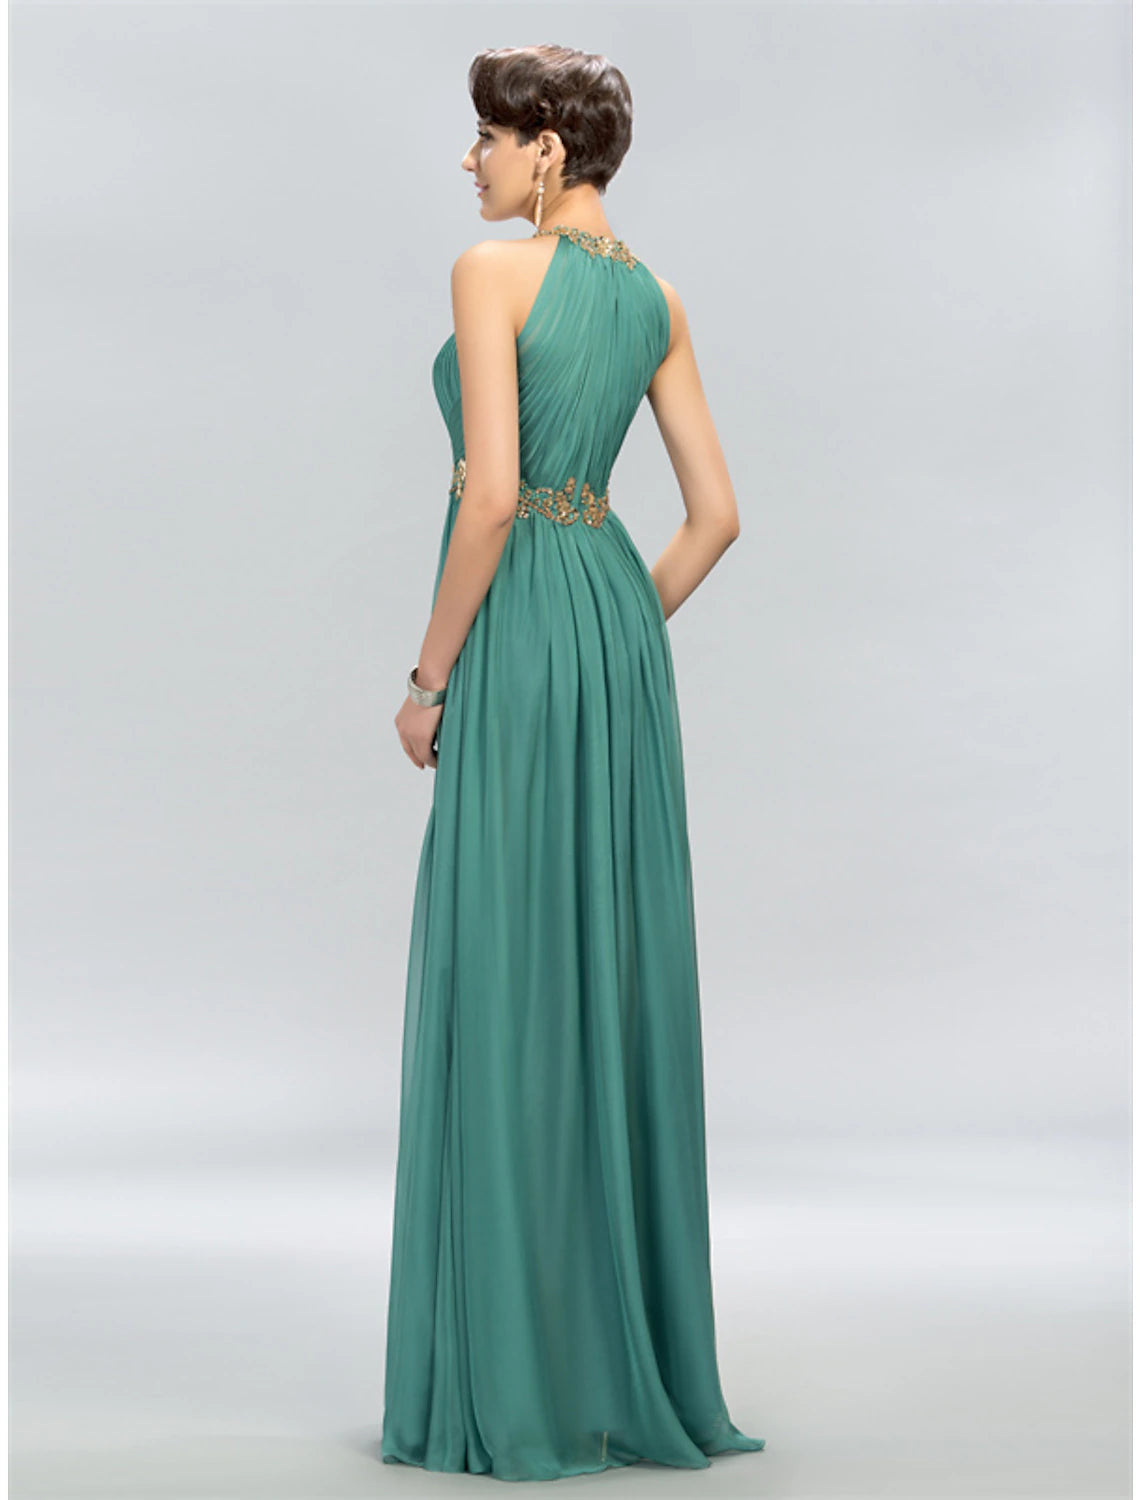 A-Line Wedding Guest Dresses Maxi Dress Party Wear Wedding Party Floor Length Sleeveless Halter Neck Chiffon with Ruched